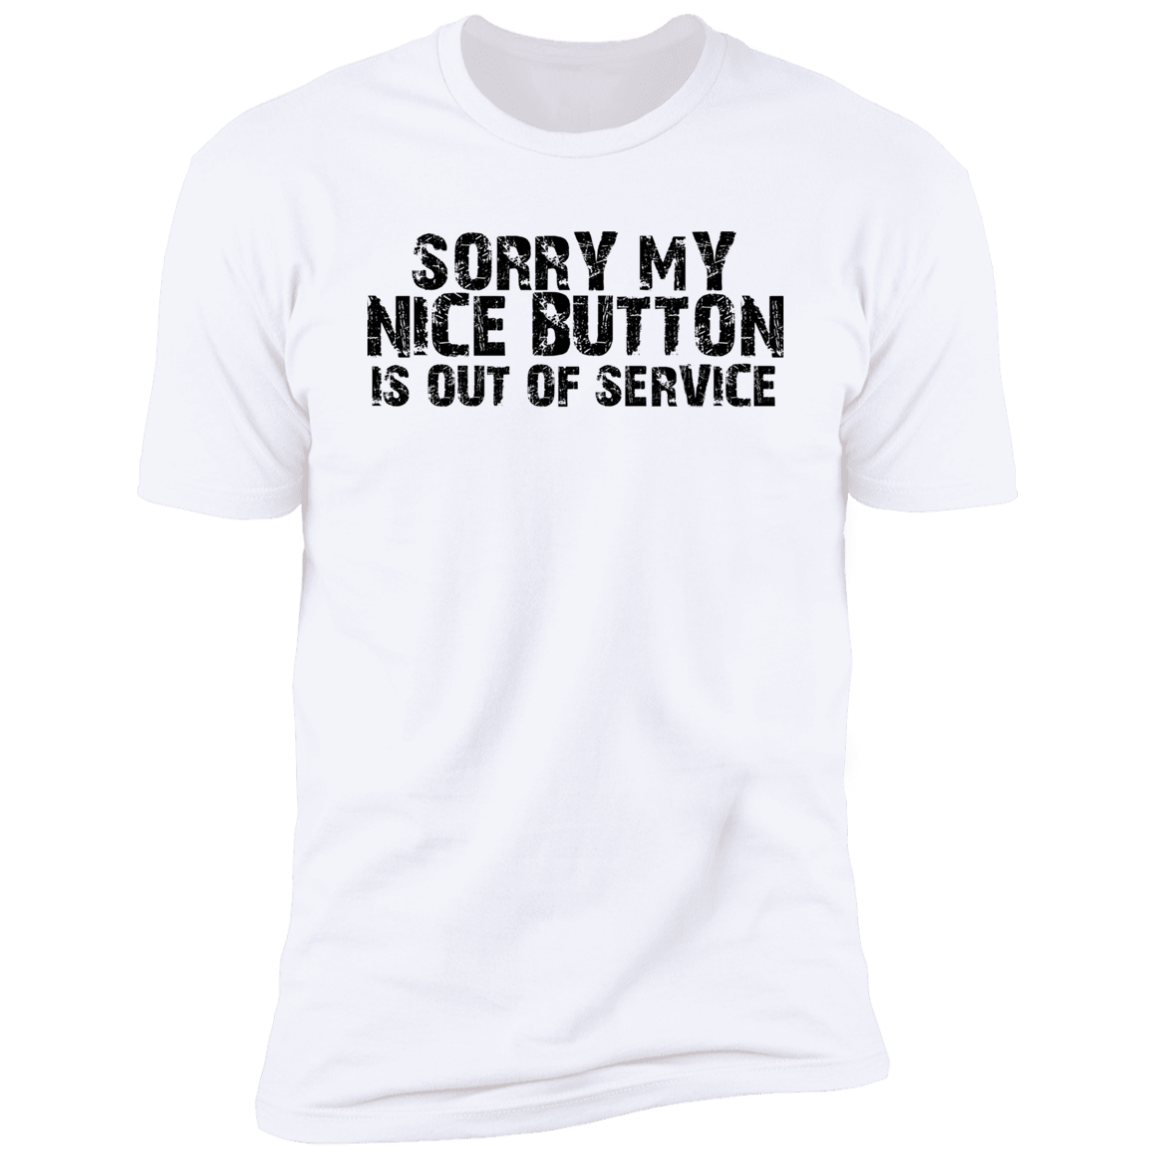 Sorry My Nice Button Is Out Of Service Unisex Short Sleeve Tee